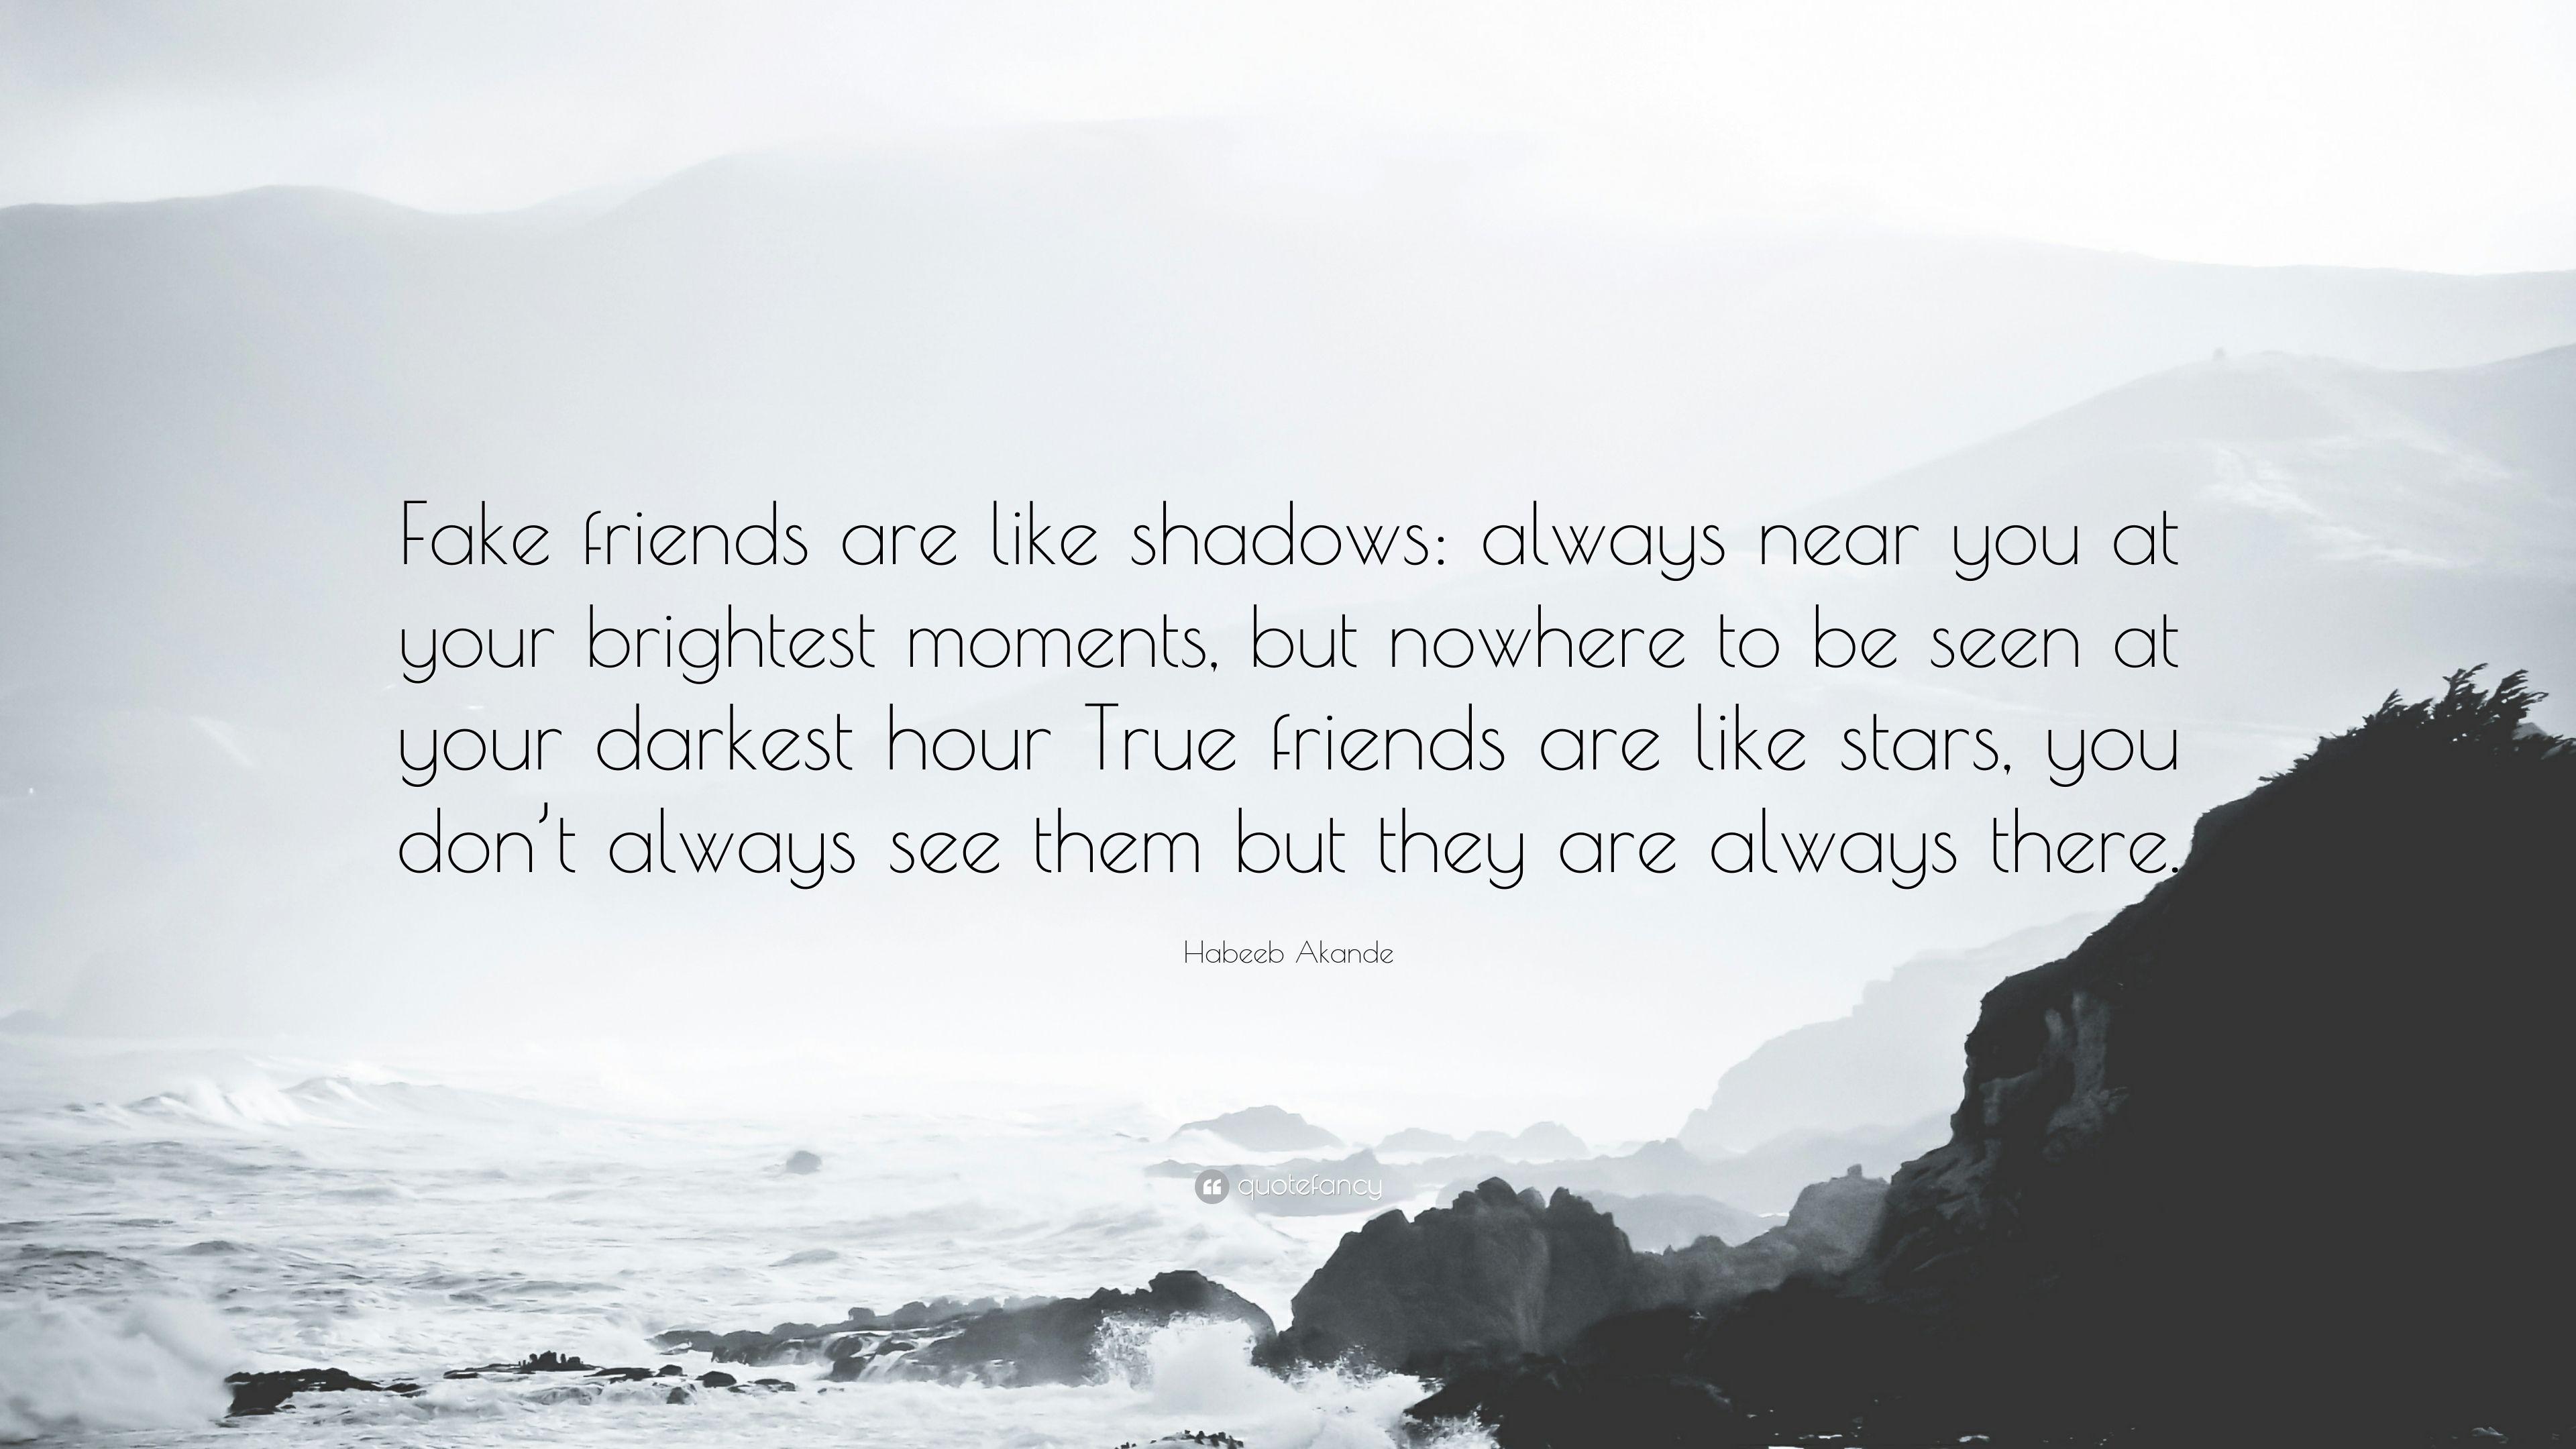 Habeeb Akande Quote: “Fake friends are like shadows: always near